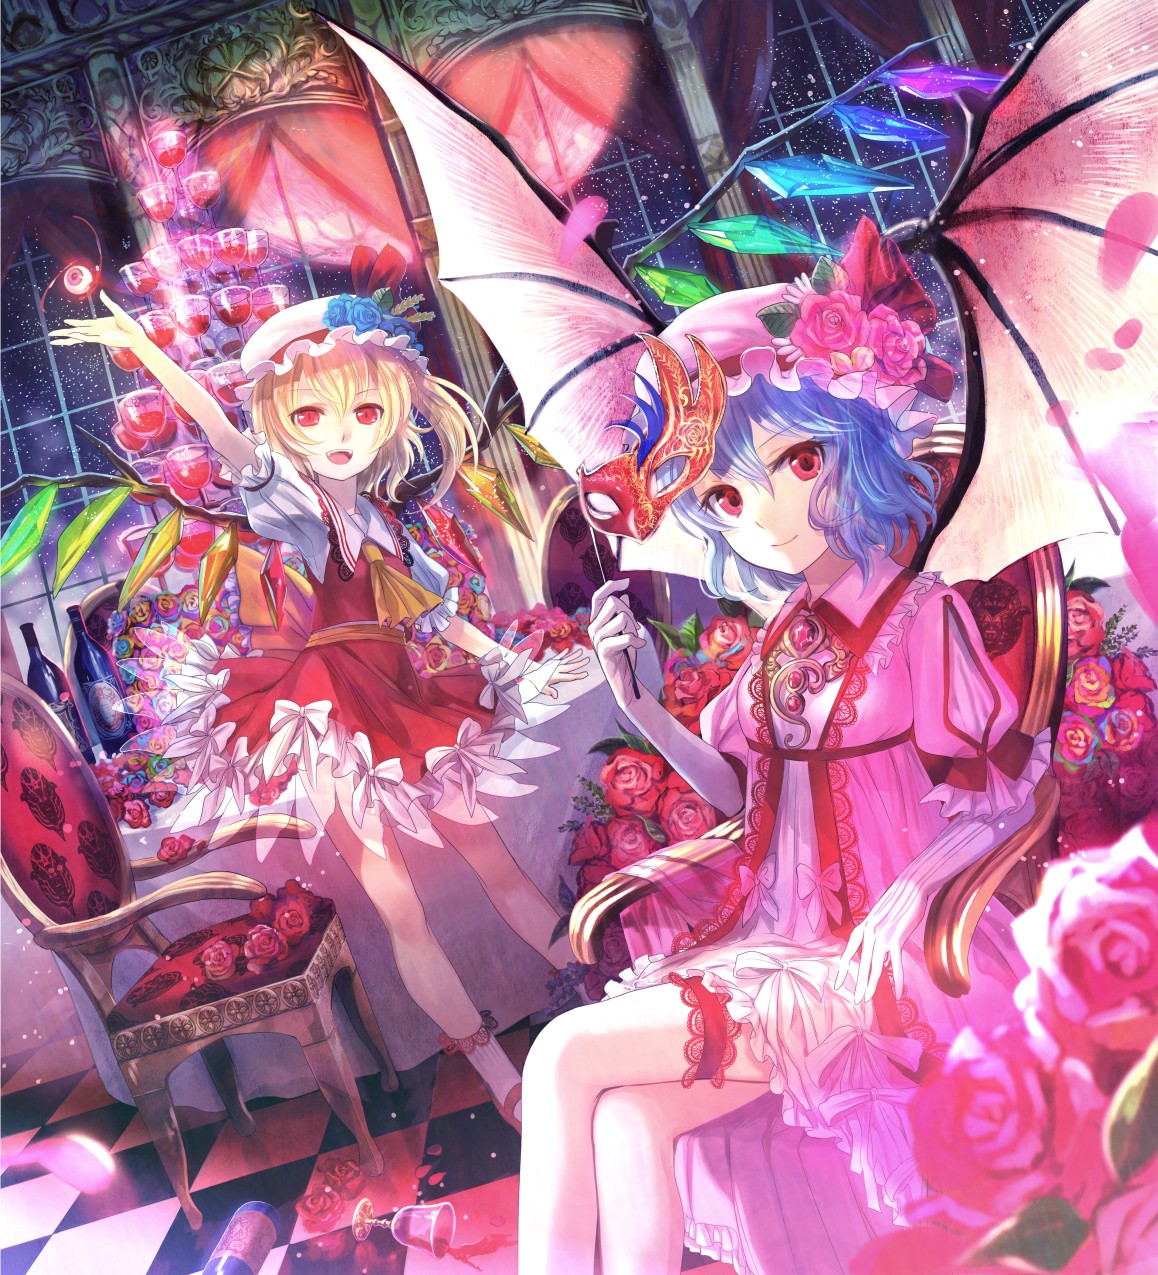 Anime 1158x1275 anime girls Fuji Choko Touhou Remilia Scarlet Flandre Scarlet wings blonde blue hair rose chair checkered gloves Moon hat mask jewelry ascot night stars window two women colorful